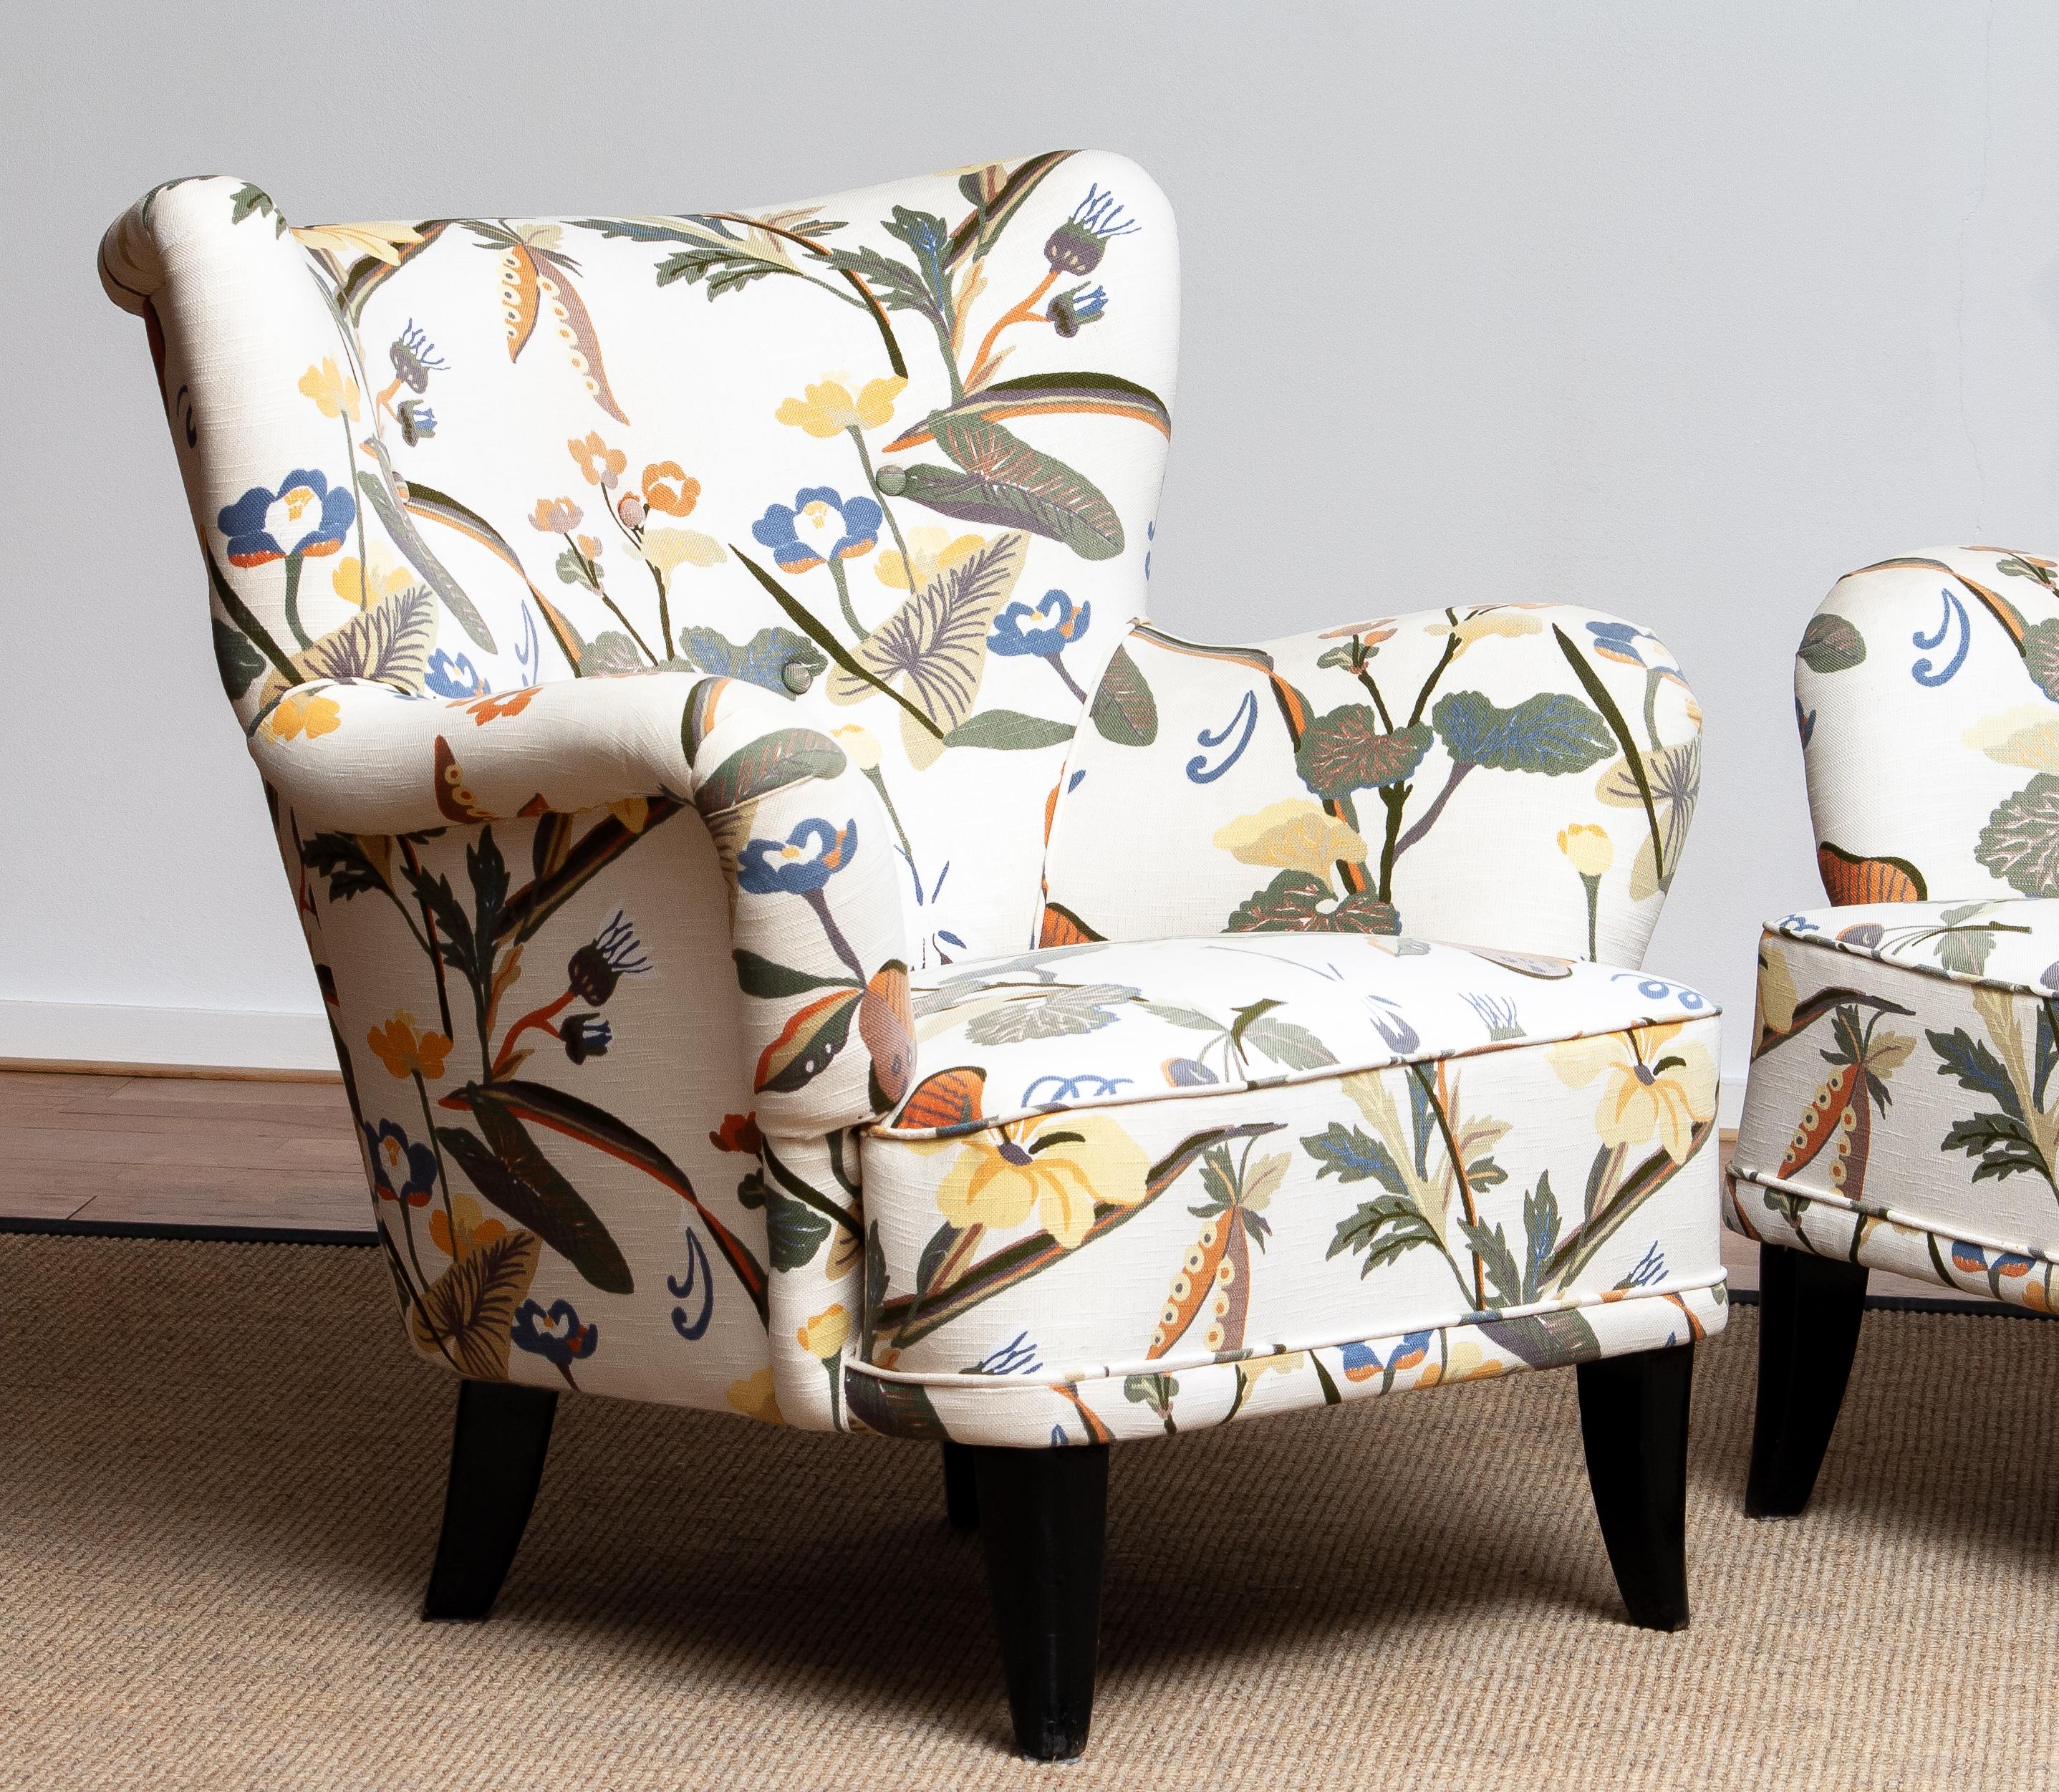 Mid-Century Modern Lounge/Easy Chairs by Ilmari Lappalainen for Asko with Josef Frank Fabric, Pair